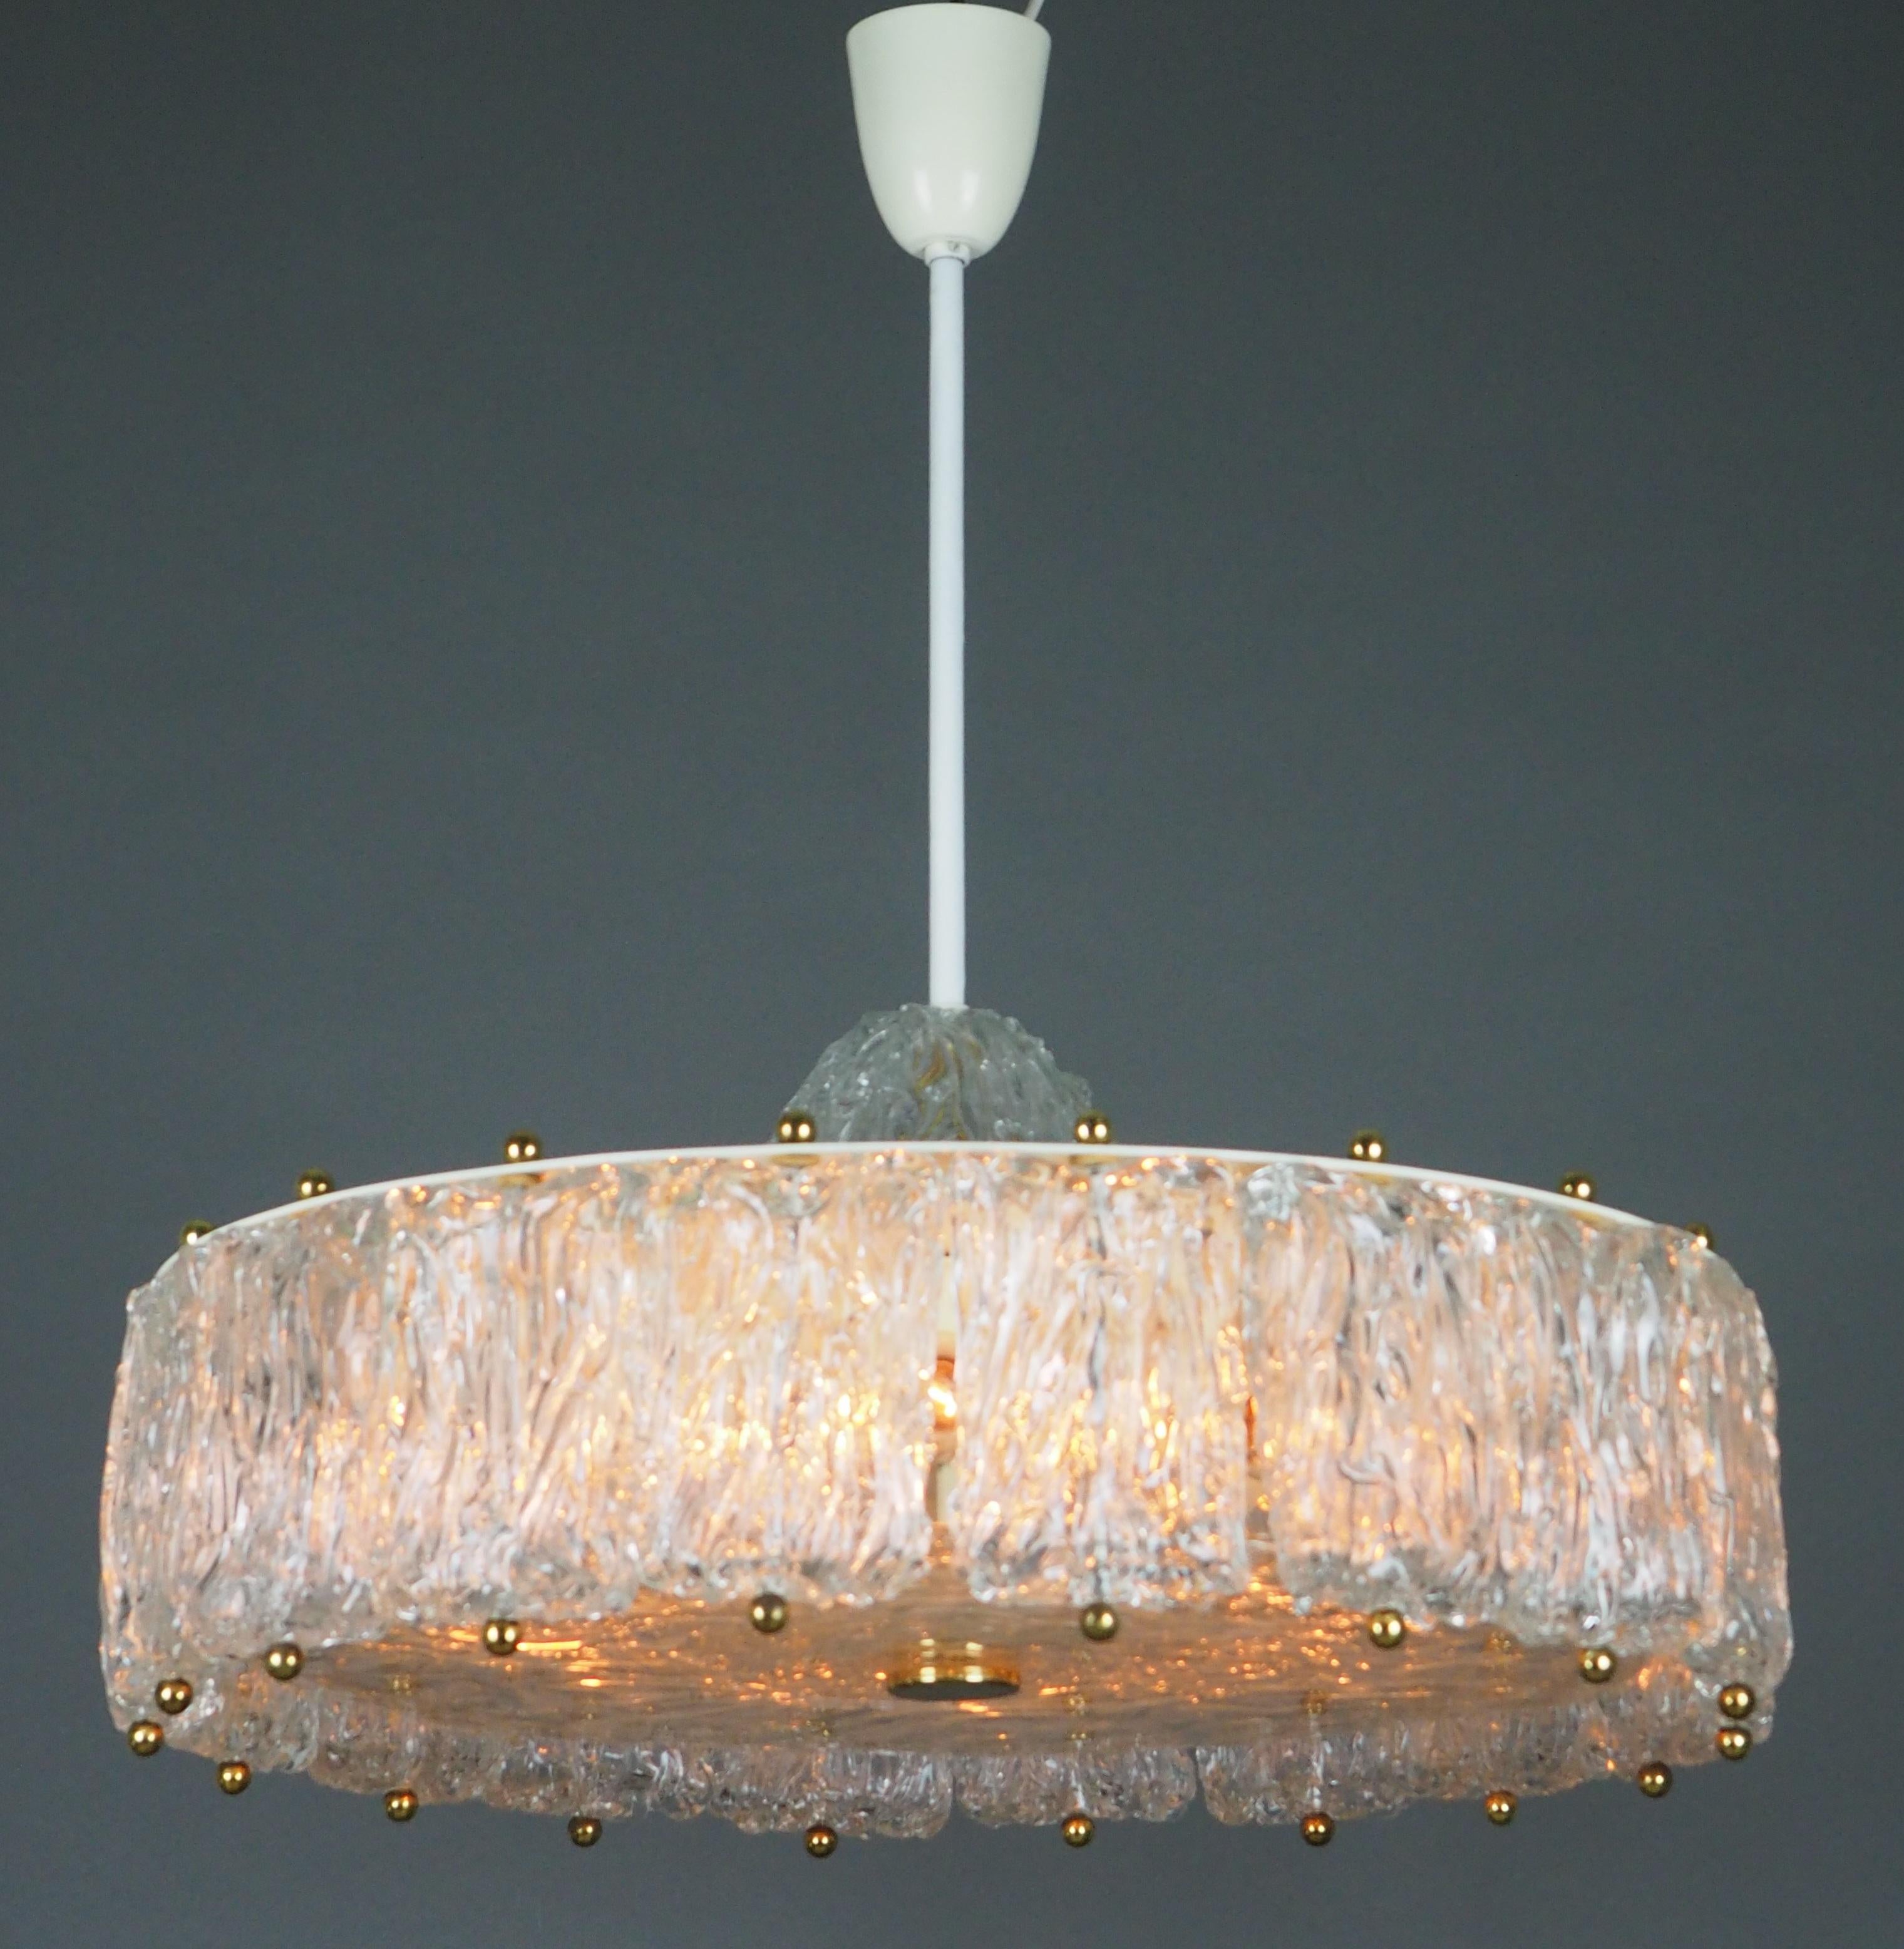 A wonderfull Mid-Century Modern twelve-light glass chandelier by Aureliano Tos, Italy circa 1960.
This beautiful chandelier is made of textured glass, lacquered metal and brass hardware.
Socket: 12 x e 14 (Edison) standard screw bulbs.
 